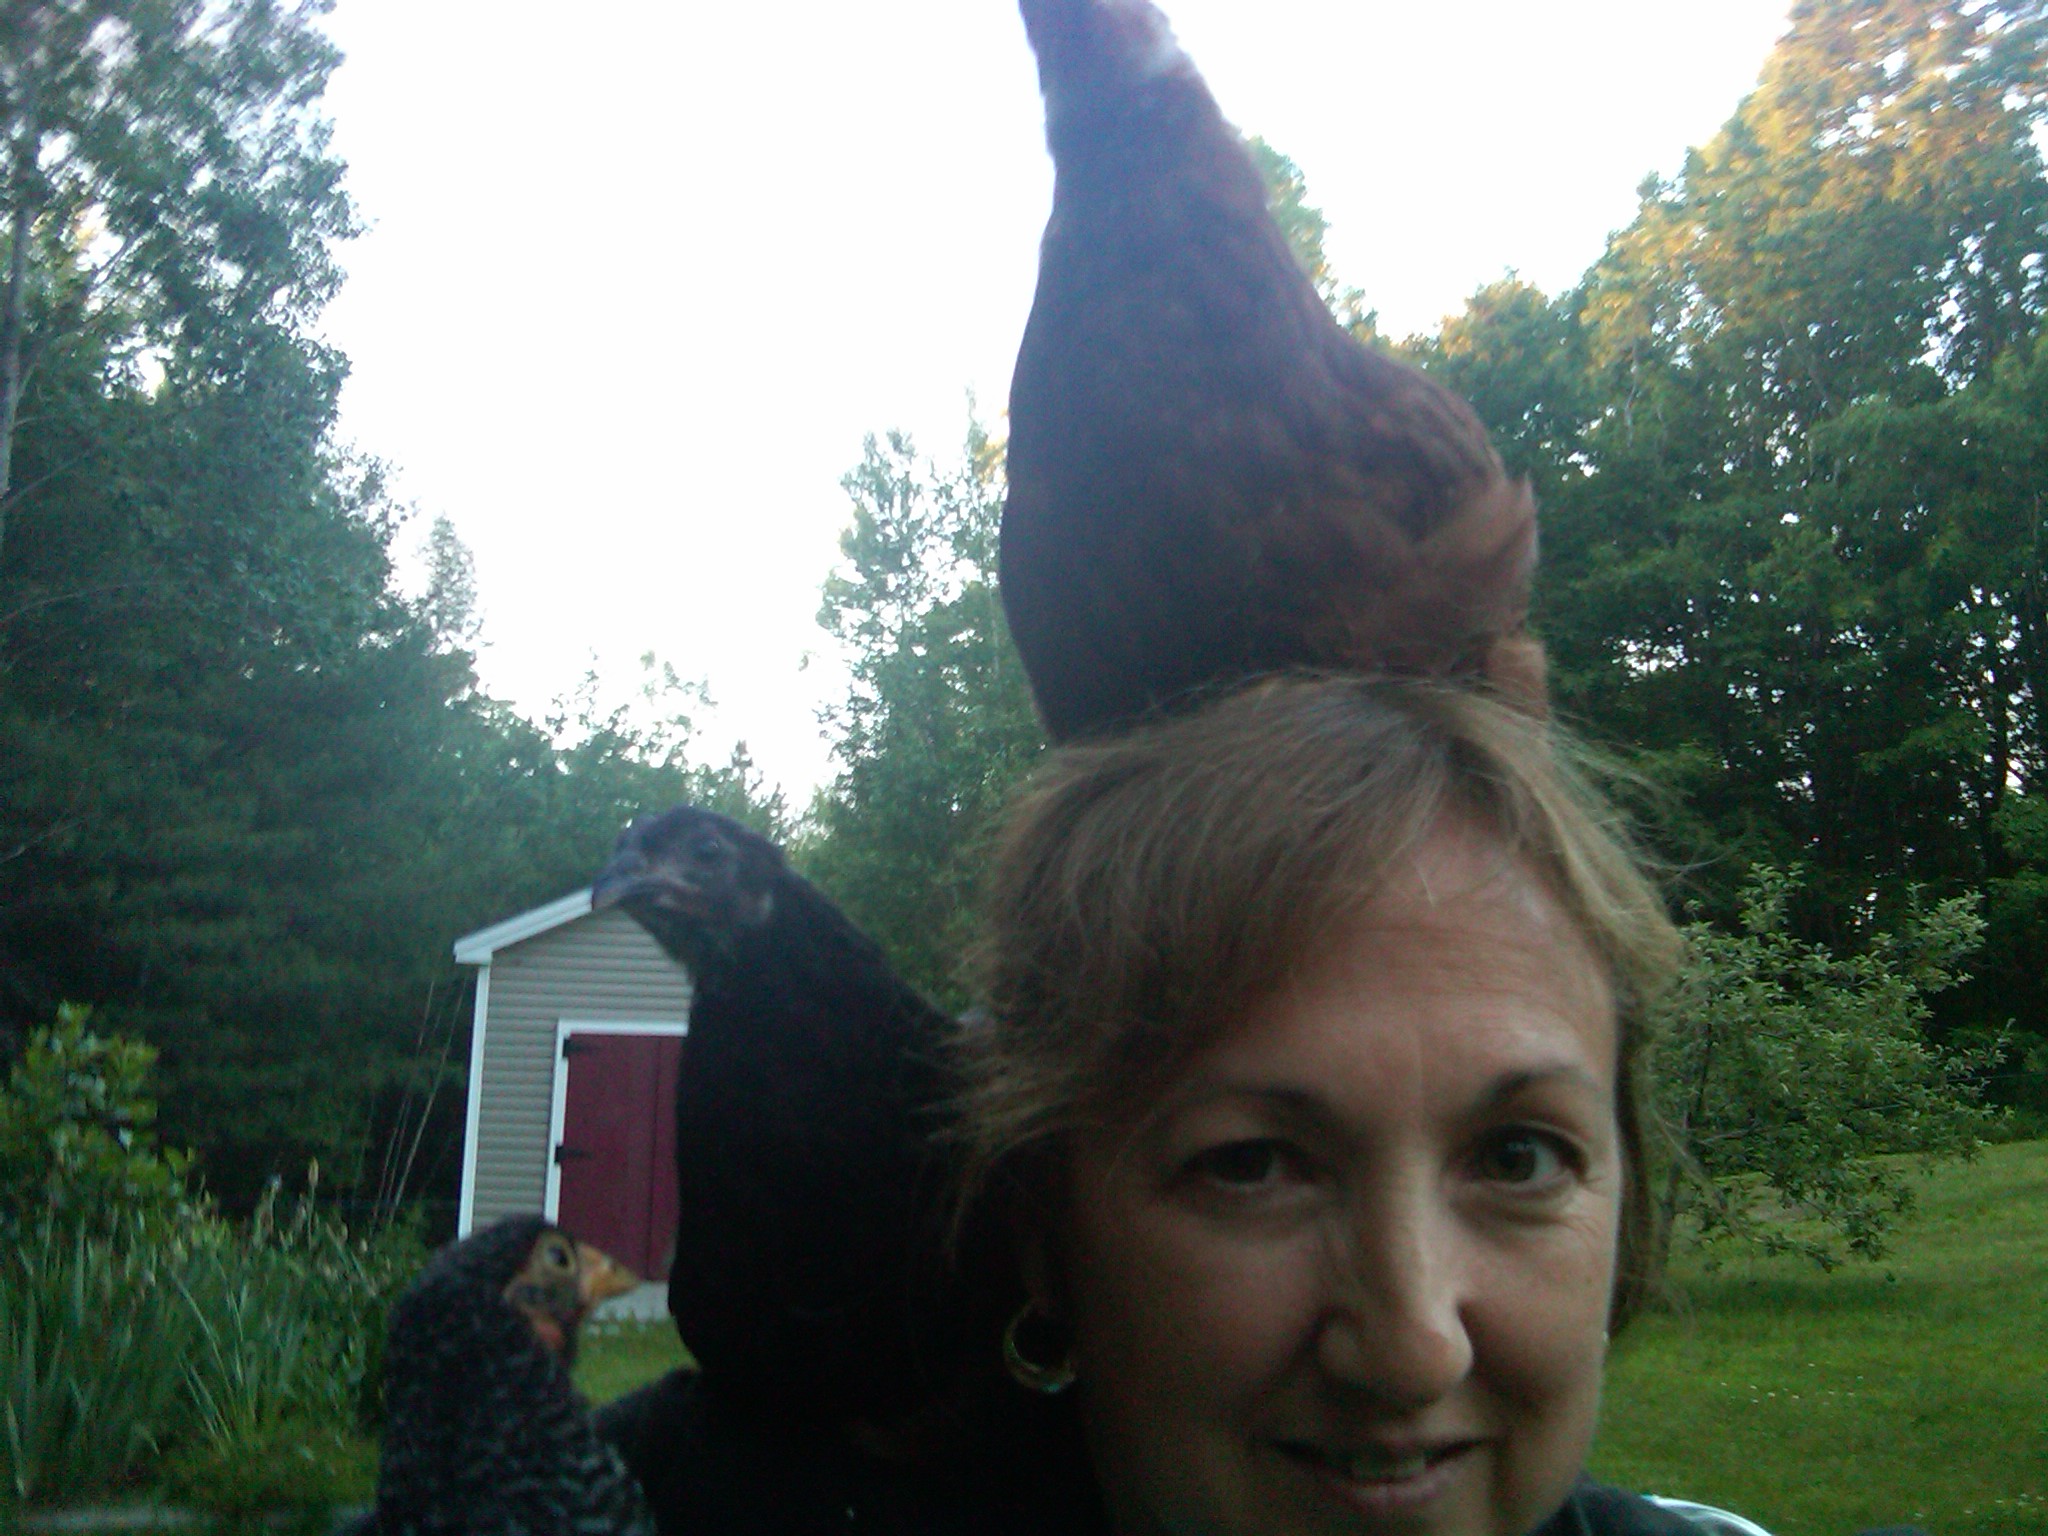 LOL   Chicken head!   That's Ruby (RIR) with Inca (Black Autralorp) on my shoulder and Tinkerbelle on my arm waiting for her turn to jump up.  Bonnie is napping in my arm.